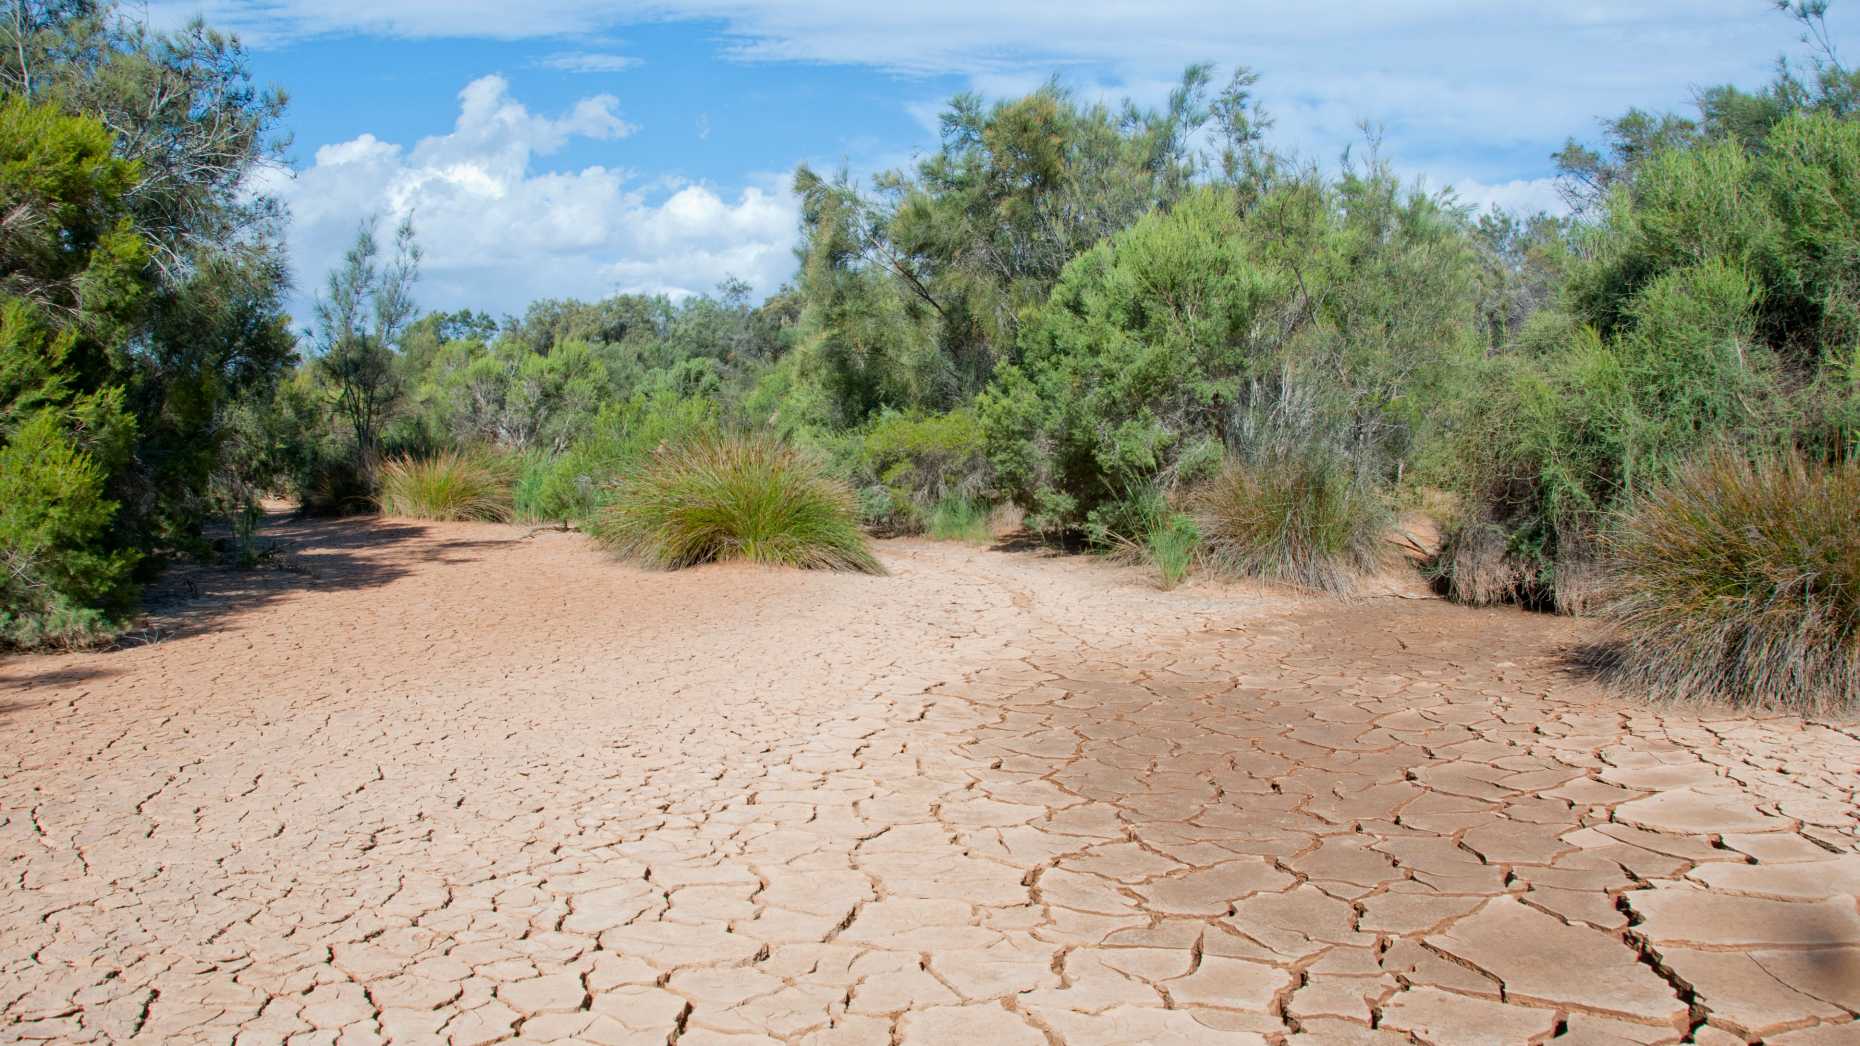 During droughts, plants are stressed and absorb less carbon dioxide